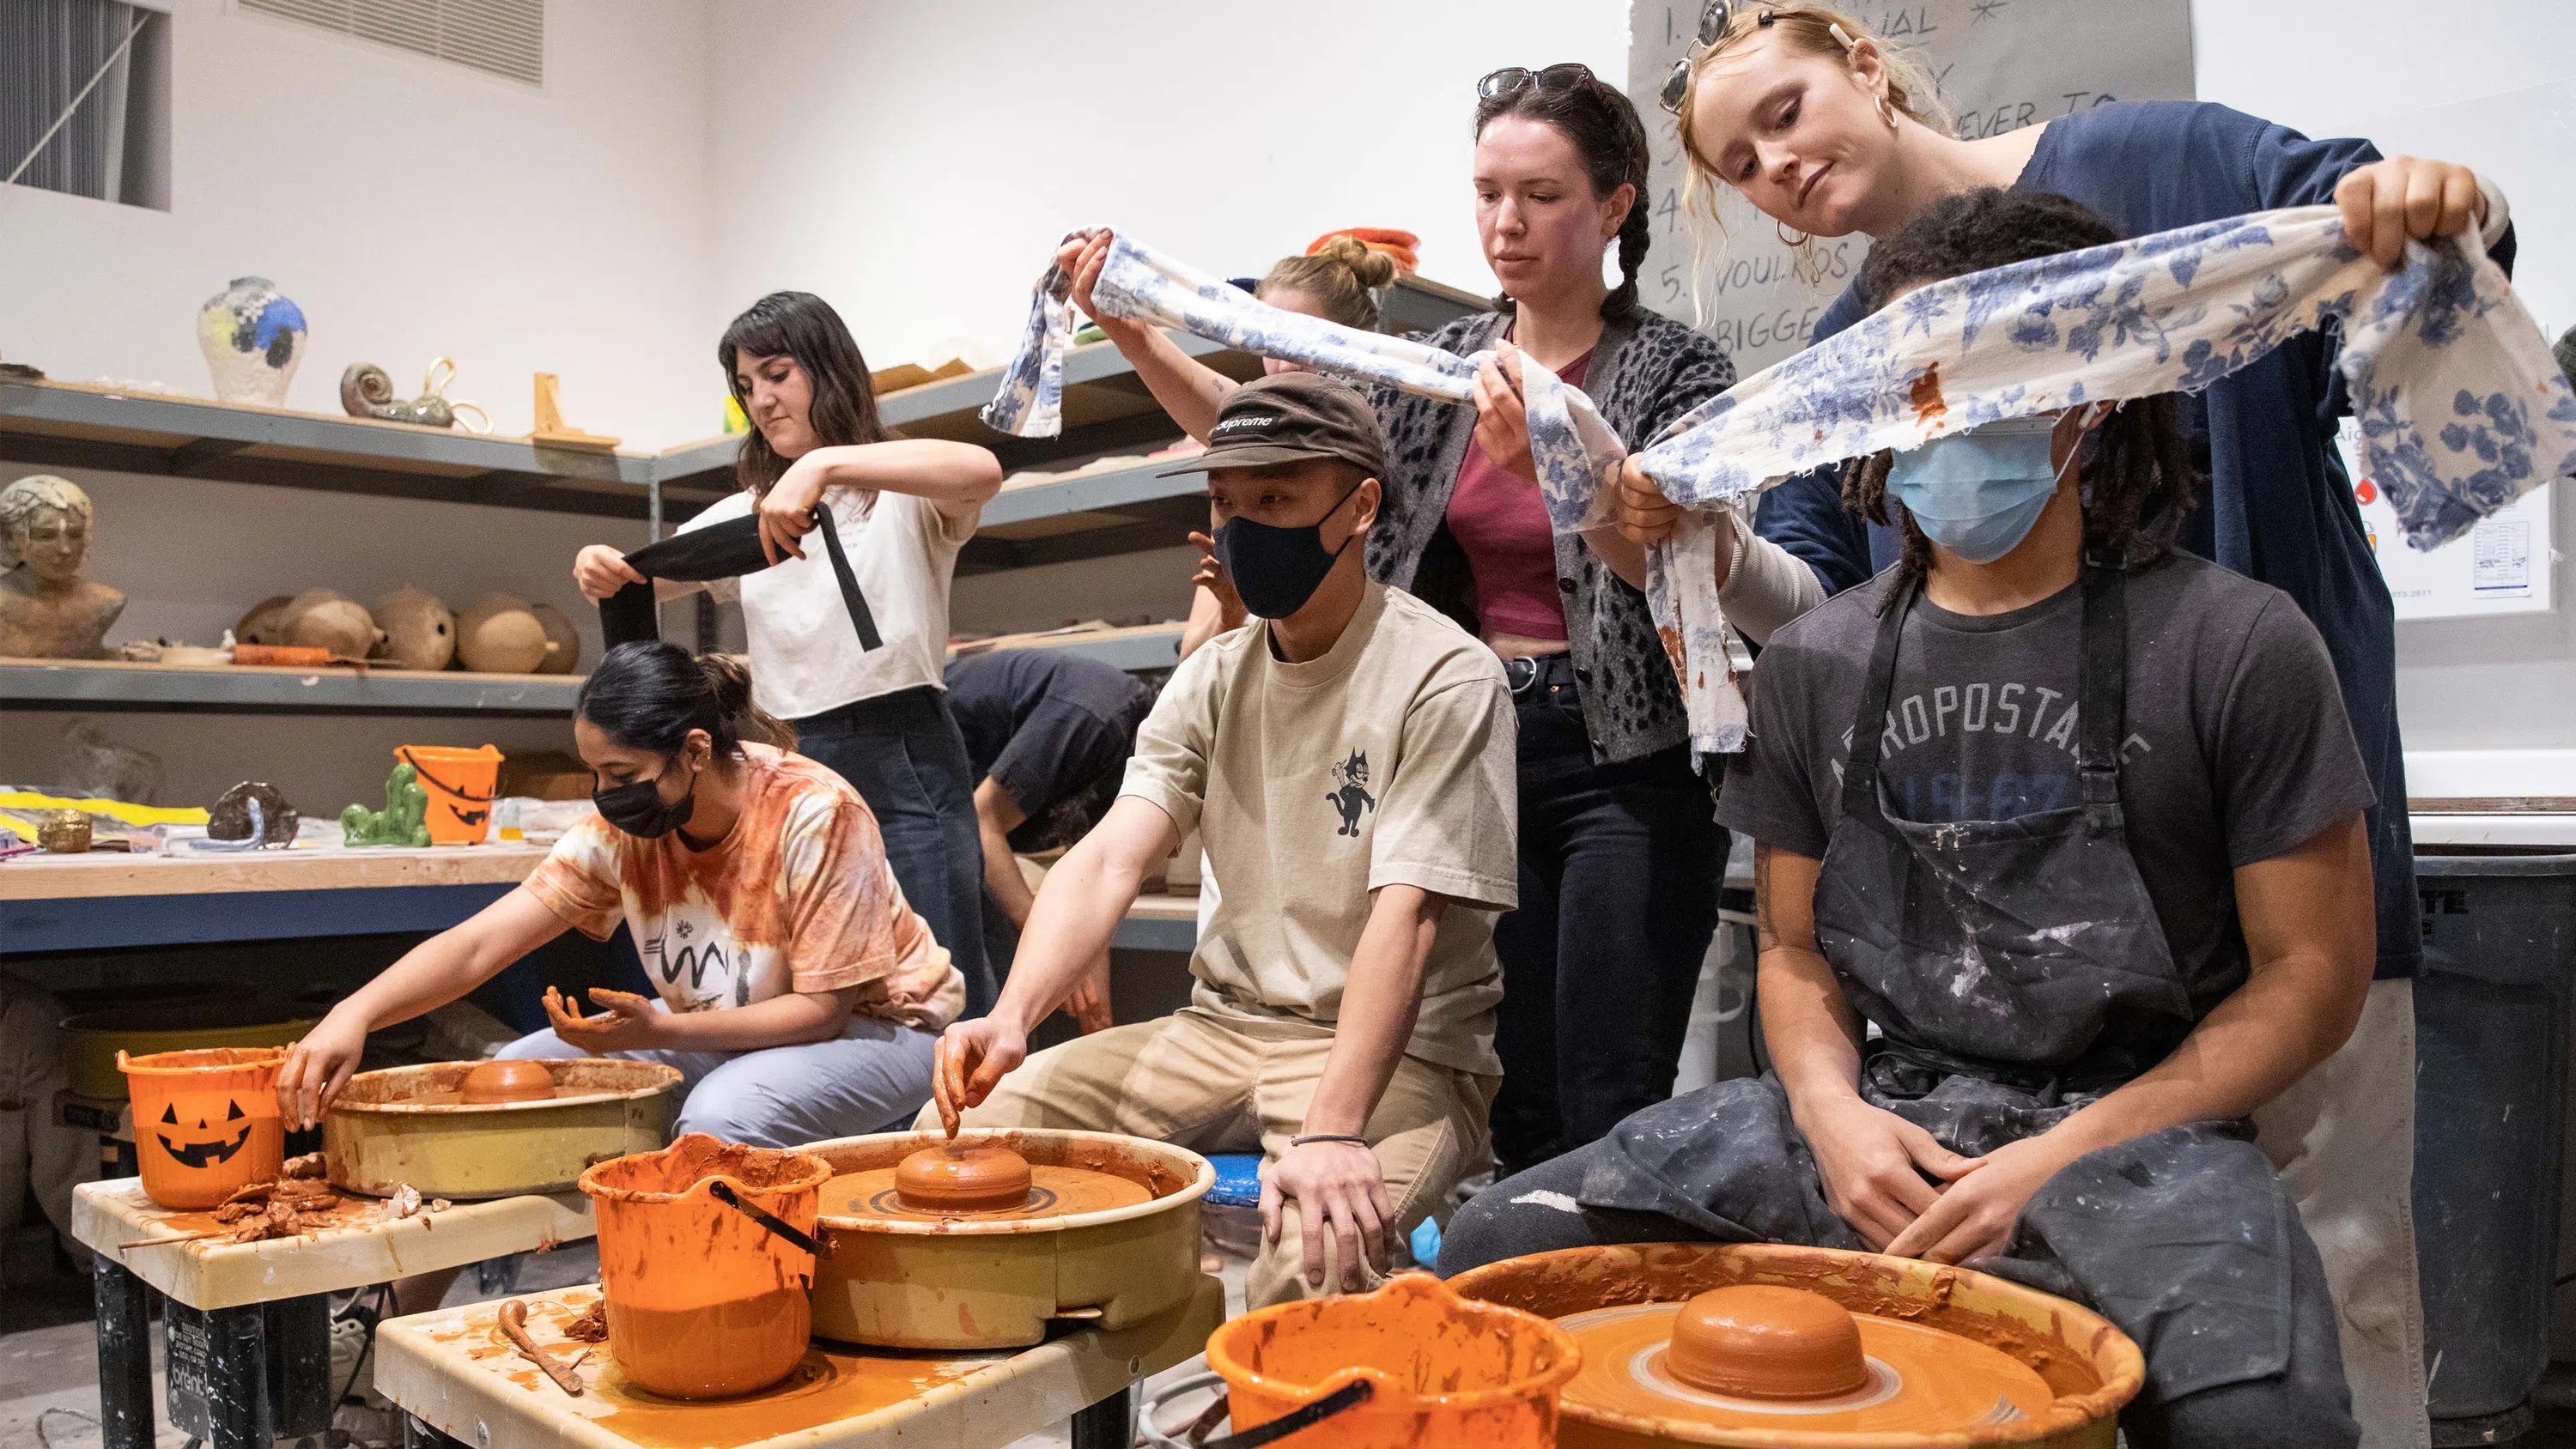 Three students standing up put blindfolds on three students sitting at a potter’s wheel